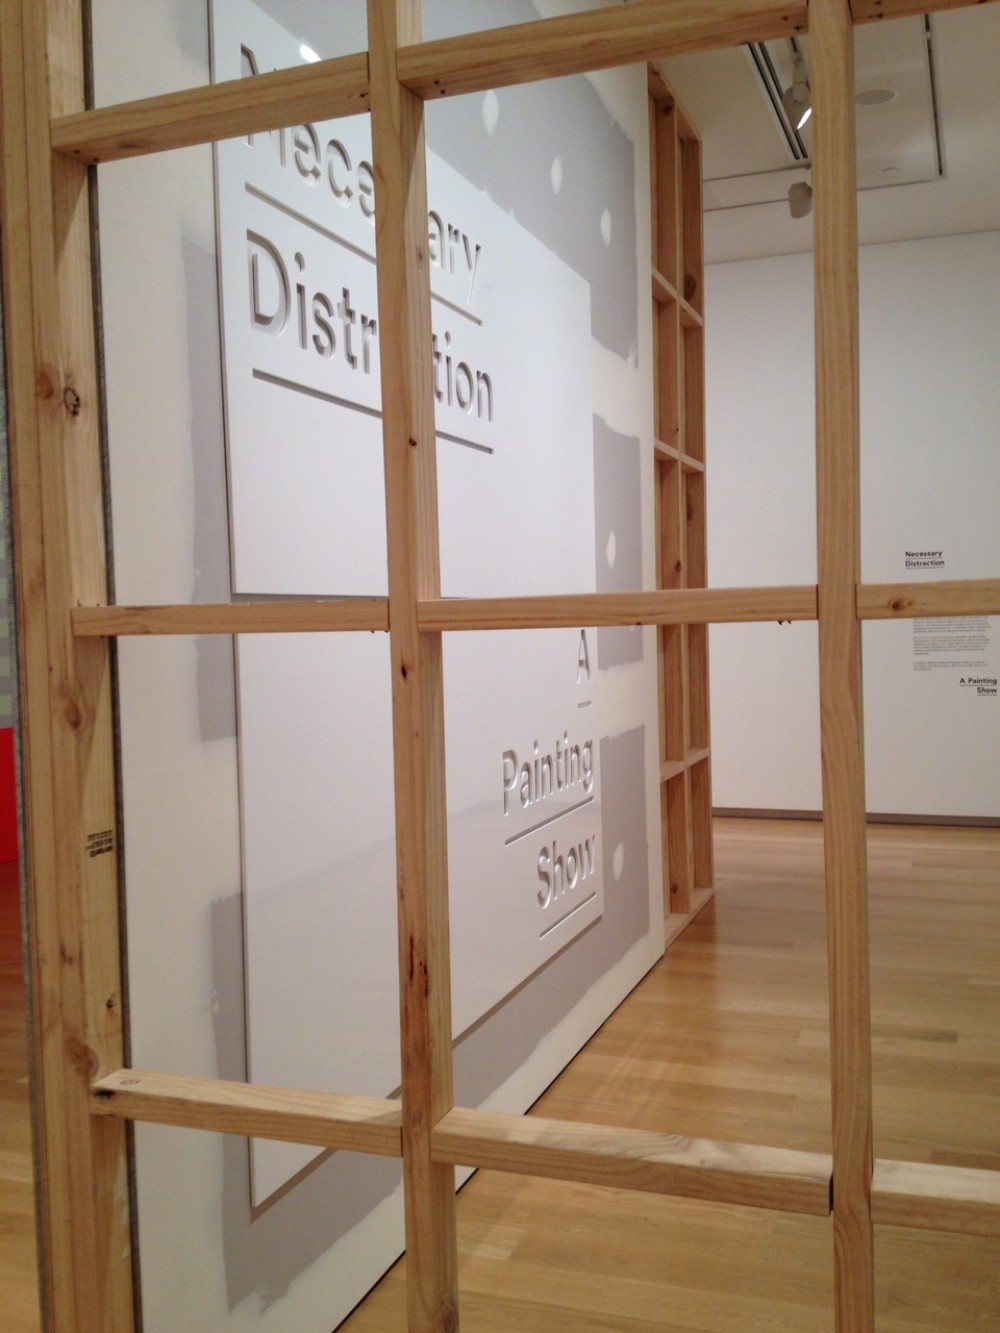 An image of the first wall of the exhibition. A wooden grid is in the foreground, and through it an unpainted gib board wall can be seen with a large white sign mounted on it. The sign reads 'Necessary Distraction, A Painting Show'. 